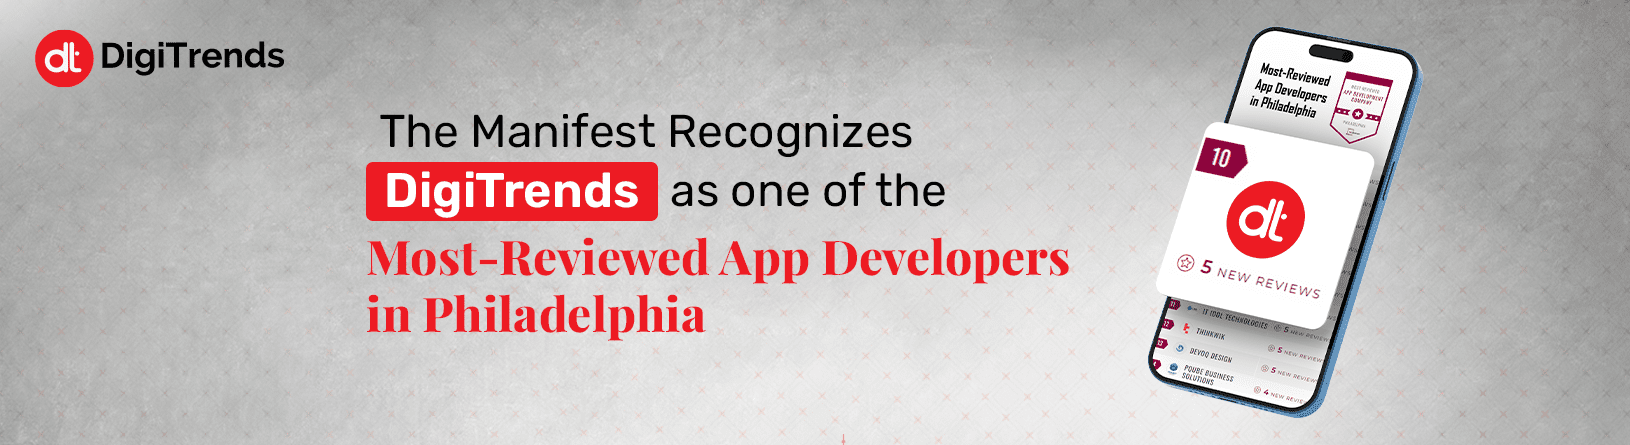 The Manifest Recognizes DigiTrends as one of the Most-Reviewed App Developers in Philadelphia.